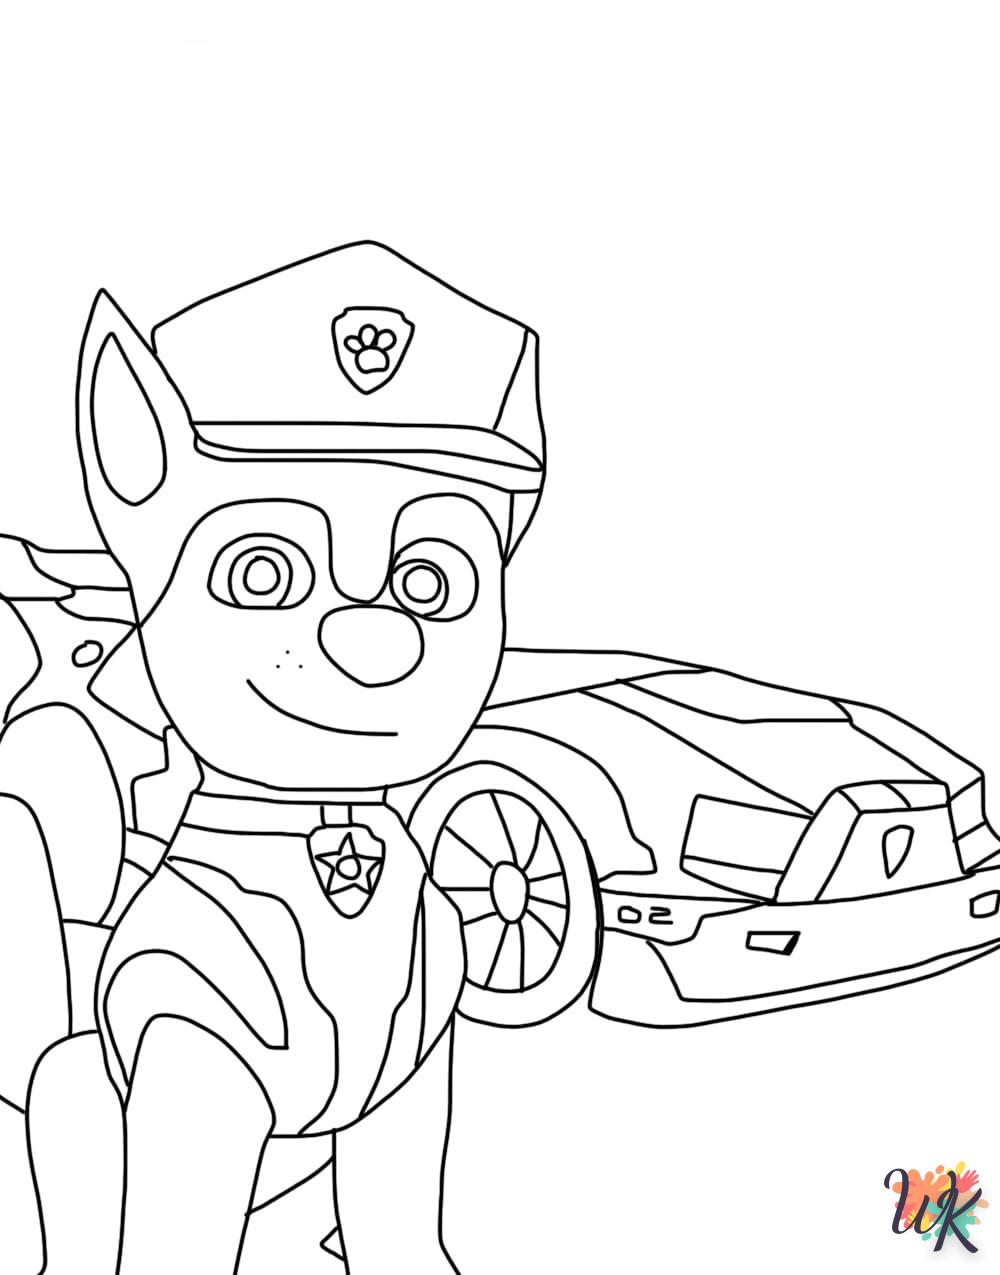 Paw Patrol coloring for 7 year olds 1